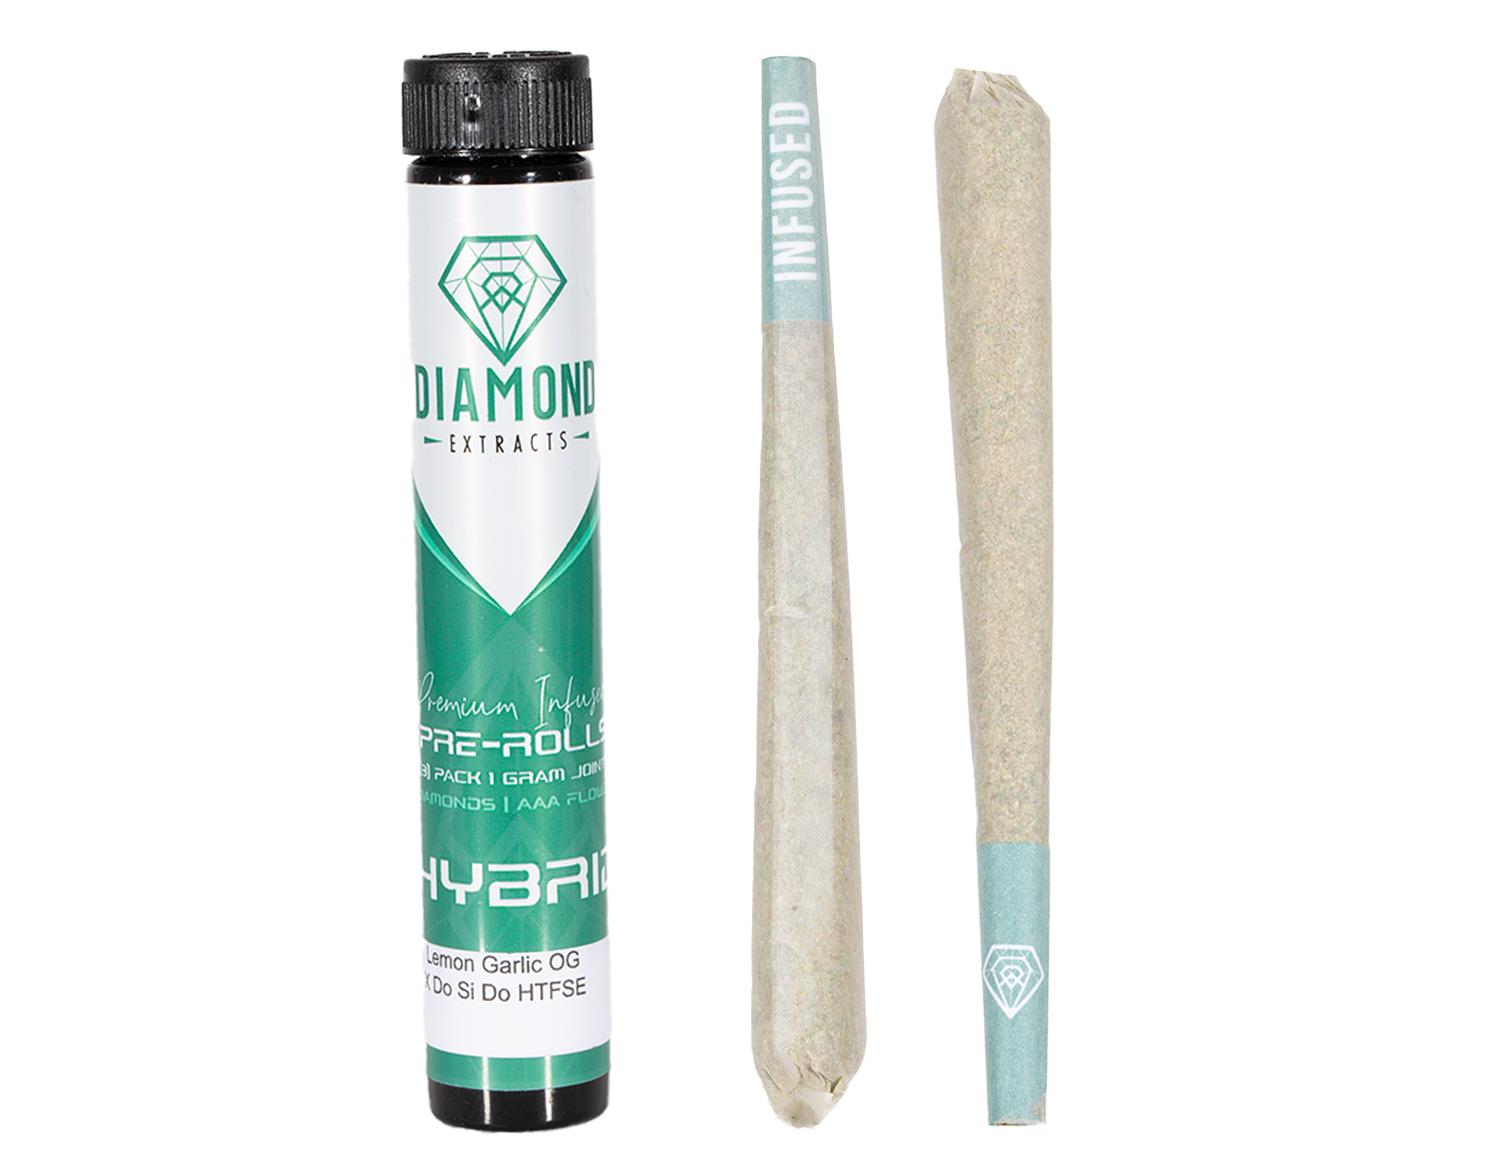 Diamond Concentrates – Pre Rolled Joints